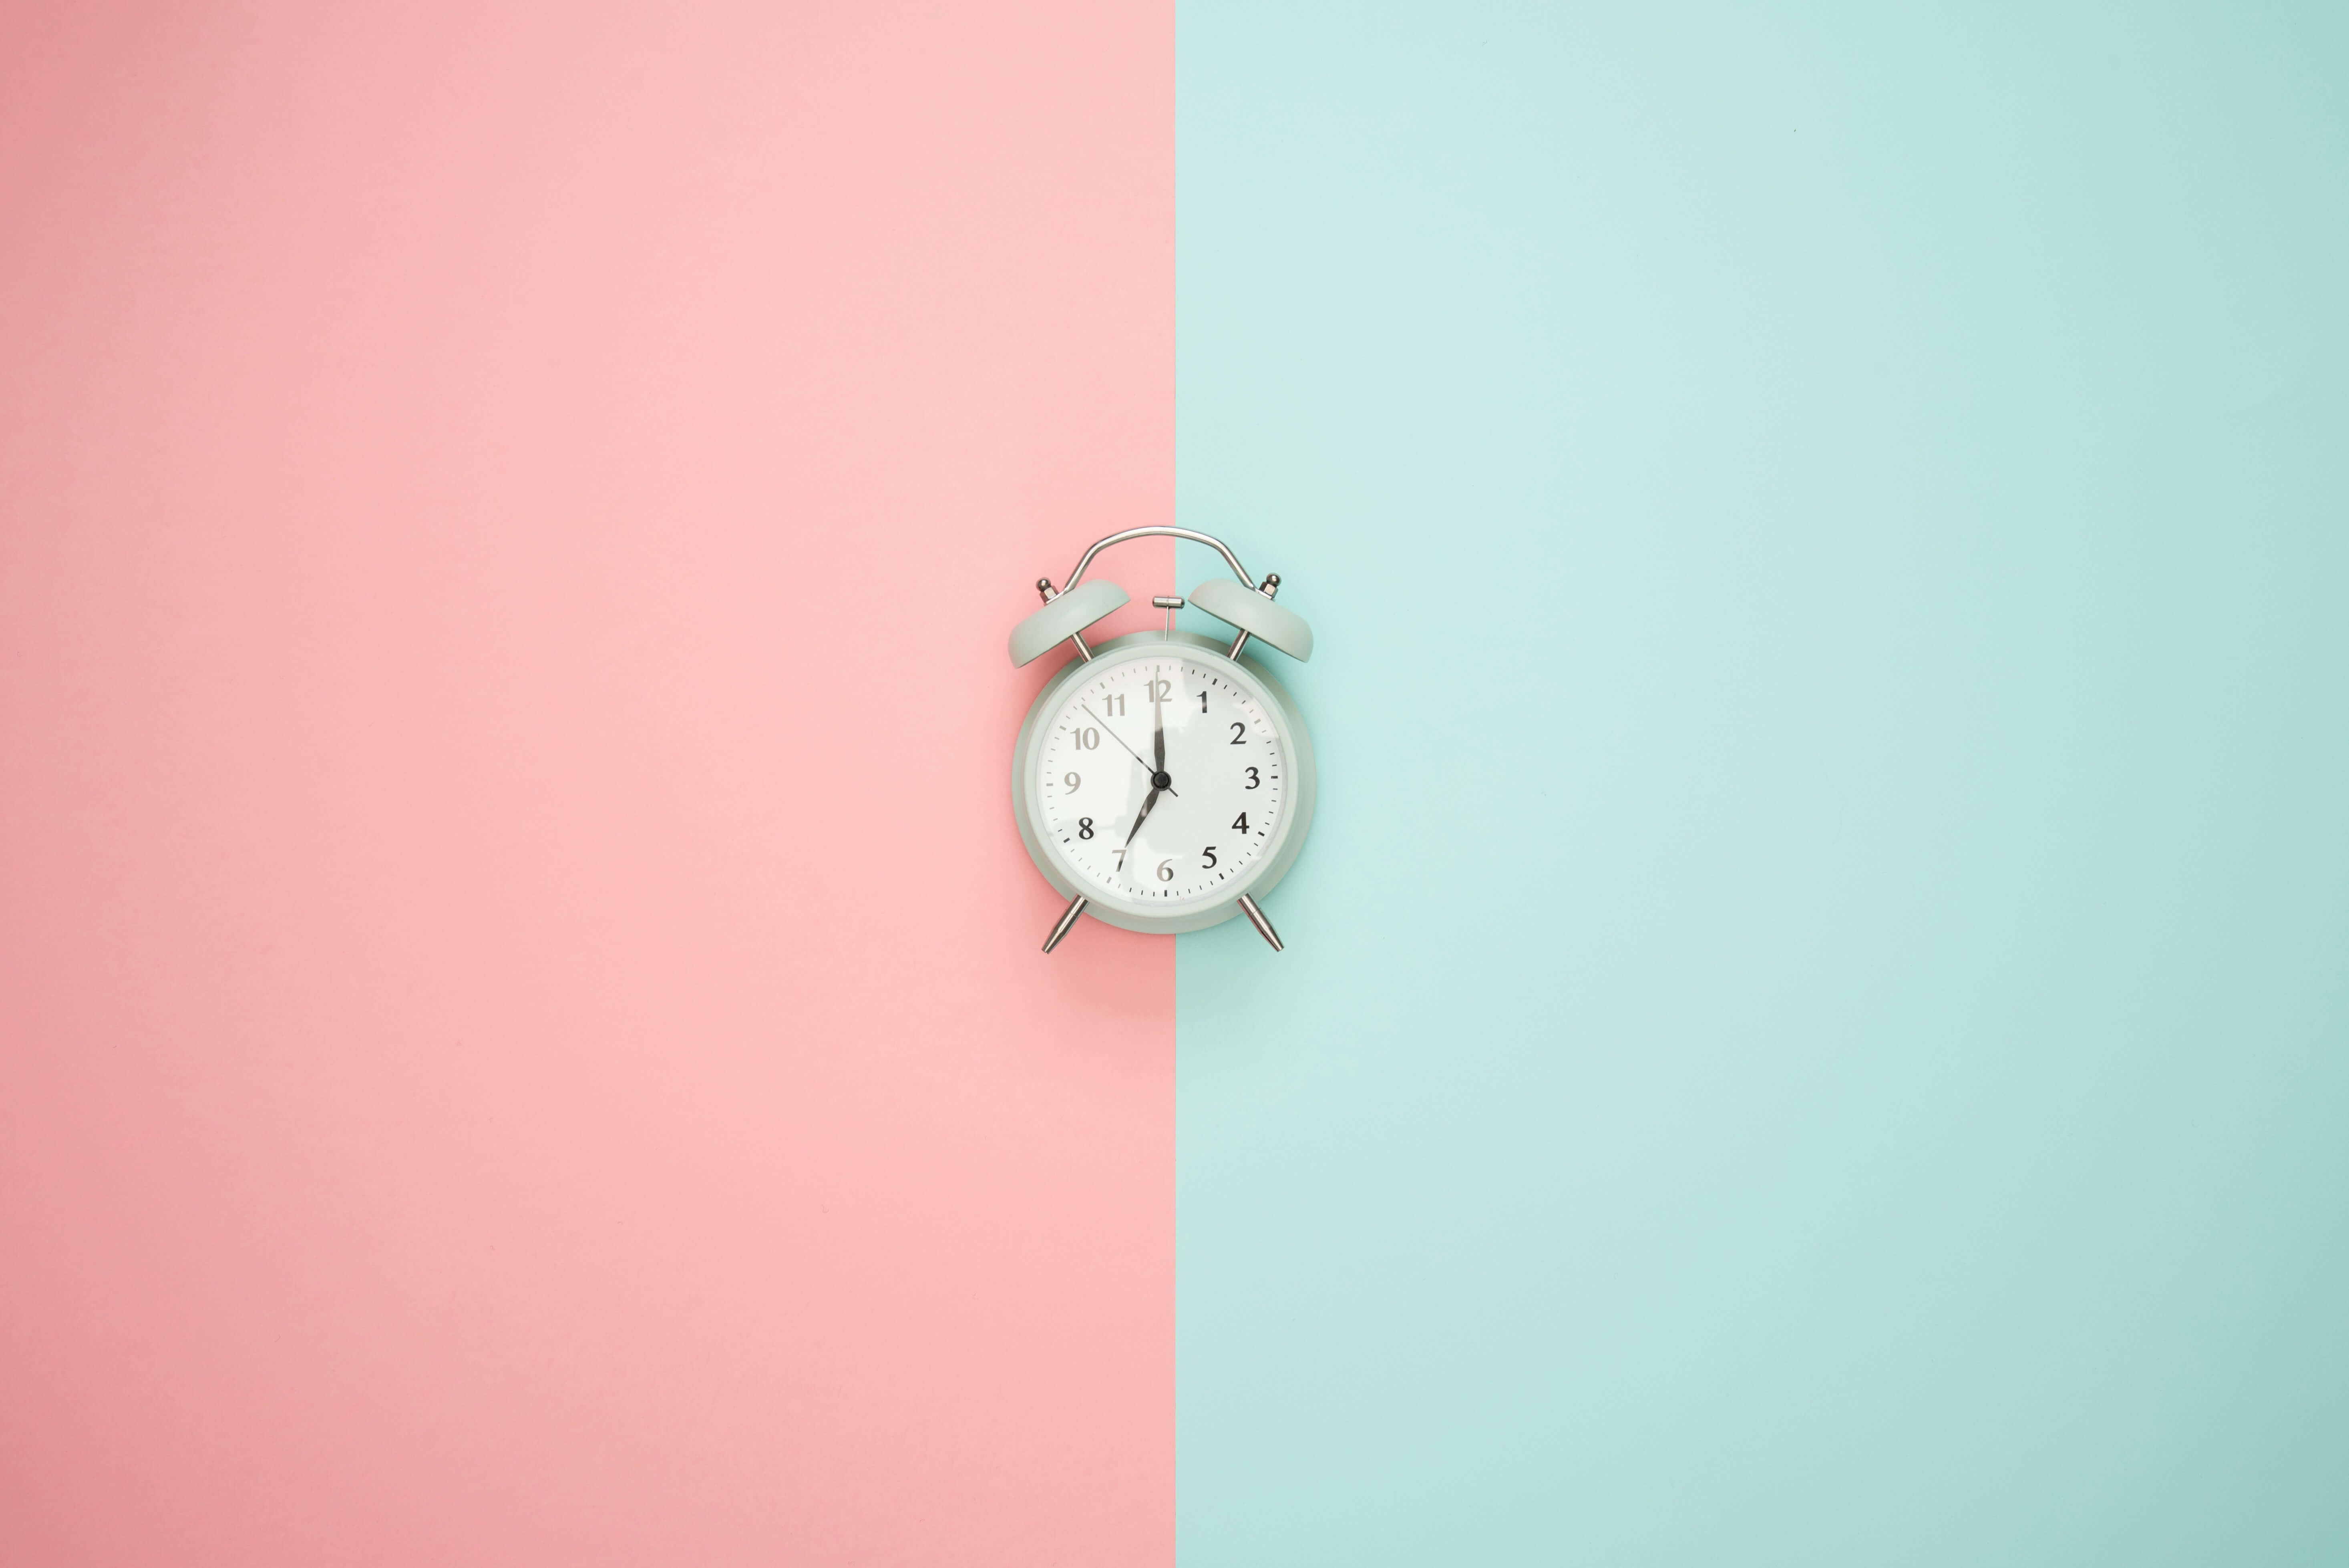 An old-style alarm clock in the center of a half pink and half blue background